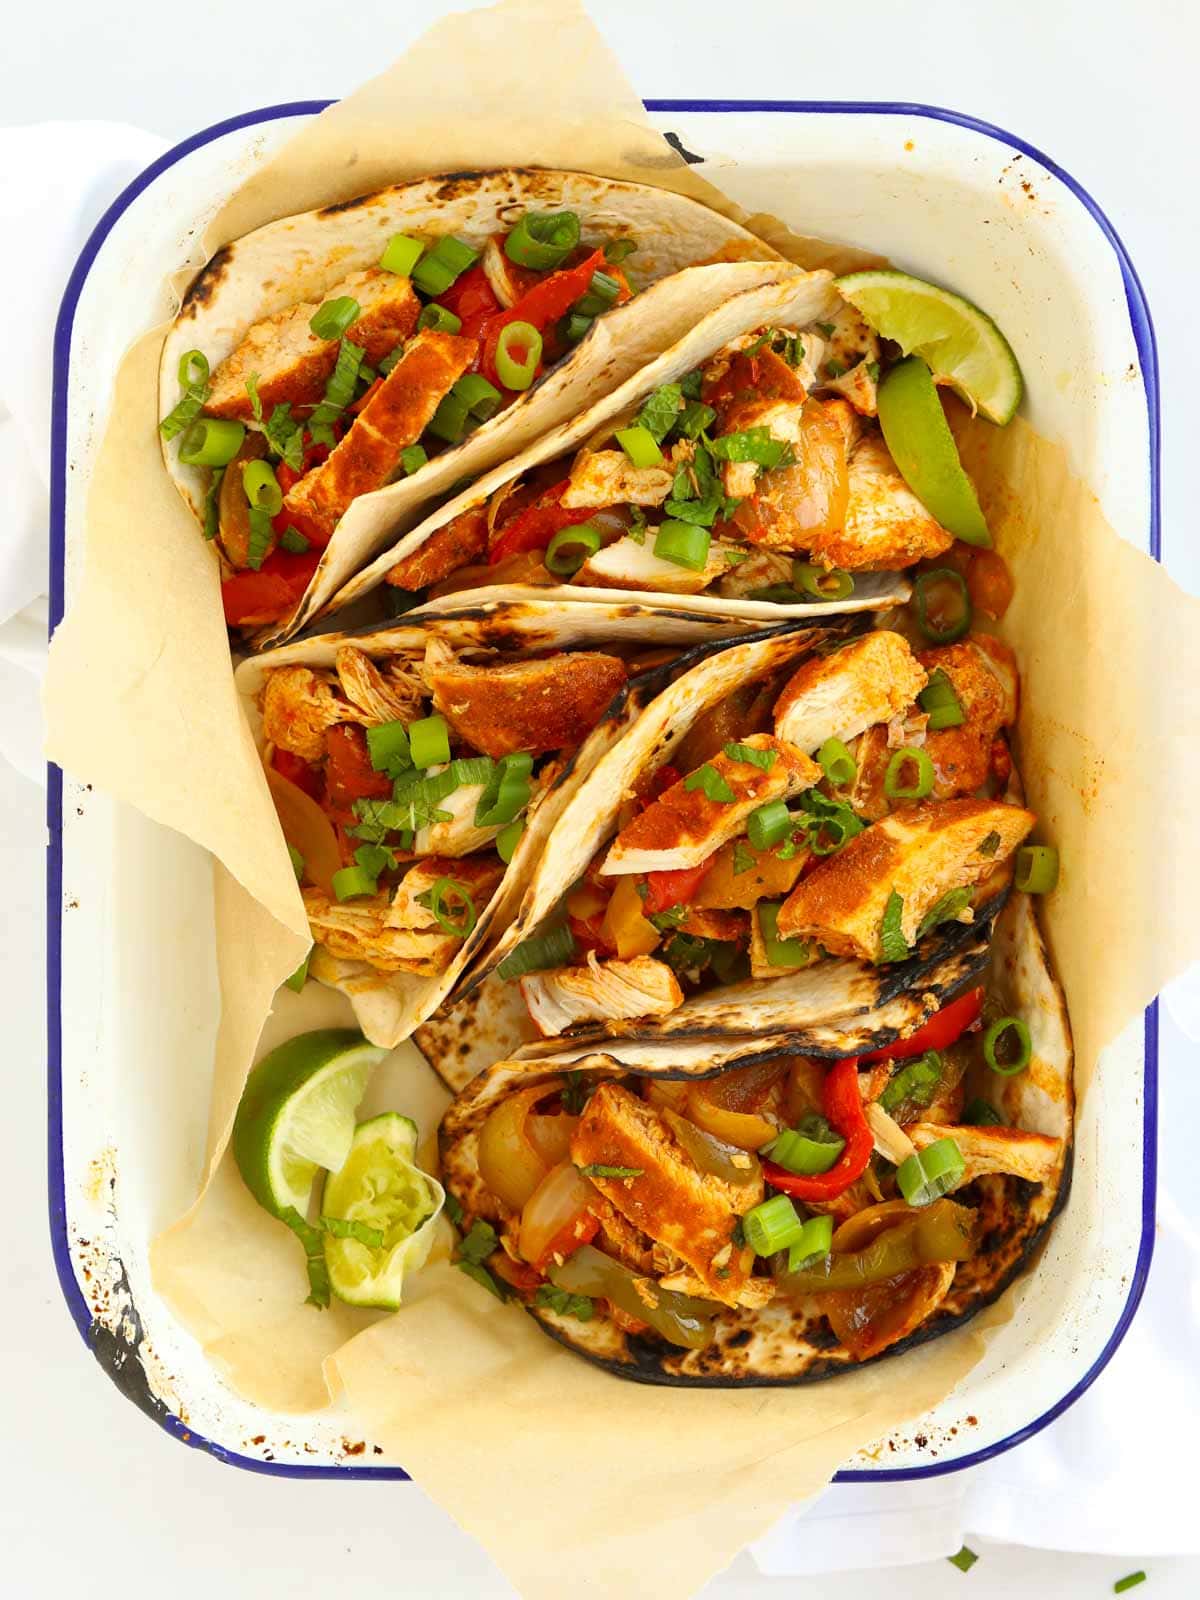 Recipe for slow cooker chicken fajitas, served in wraps.